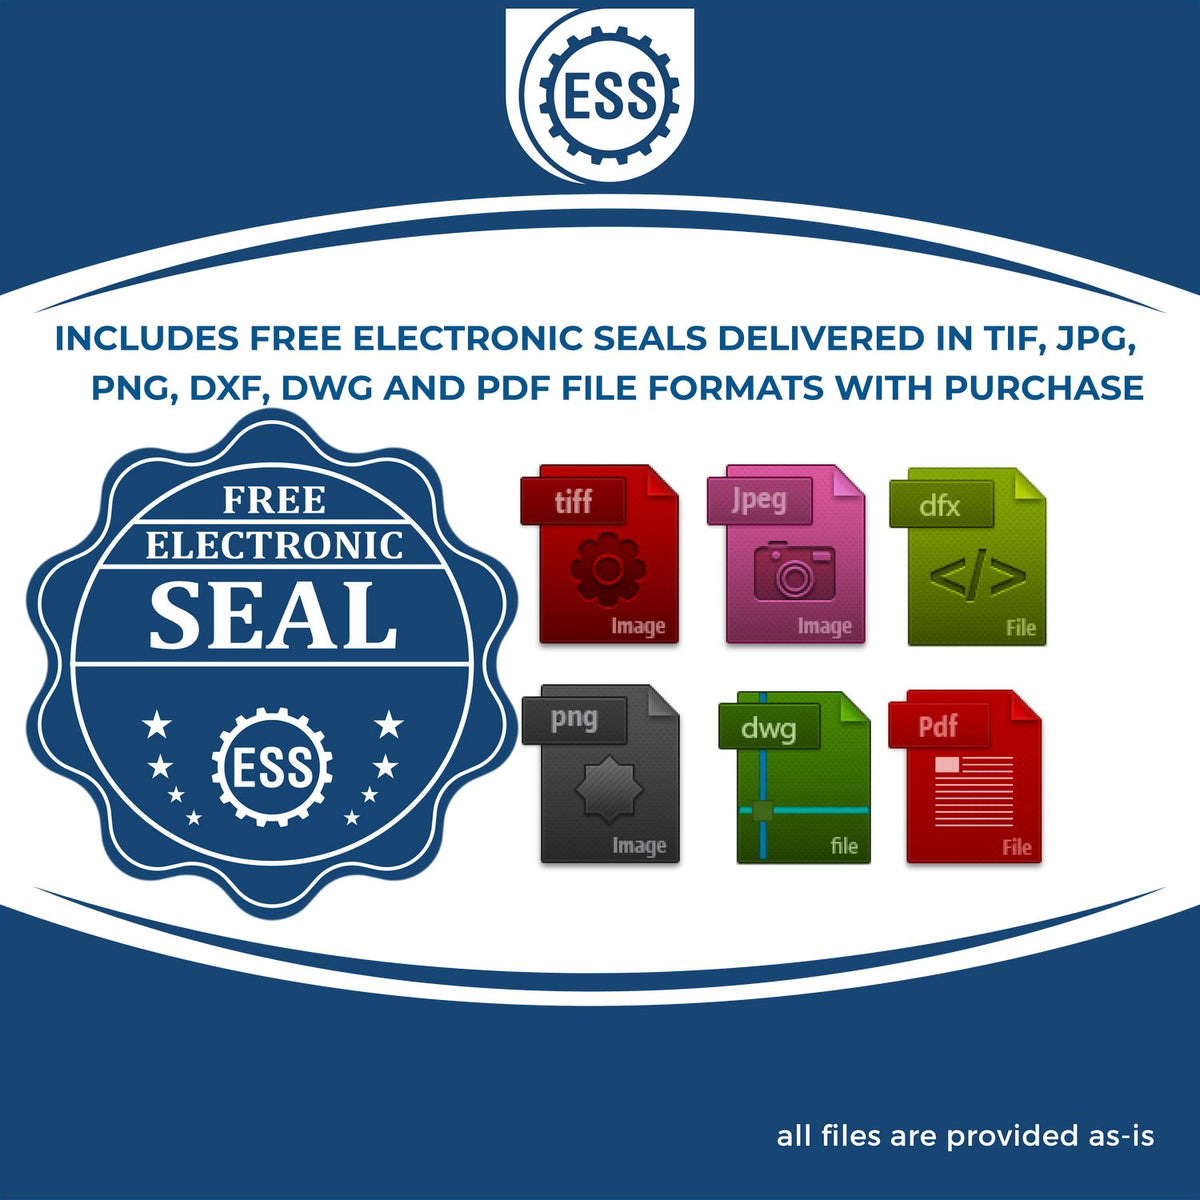 An infographic for the free electronic seal for the Hybrid Georgia Land Surveyor Seal illustrating the different file type icons such as DXF, DWG, TIF, JPG and PNG.